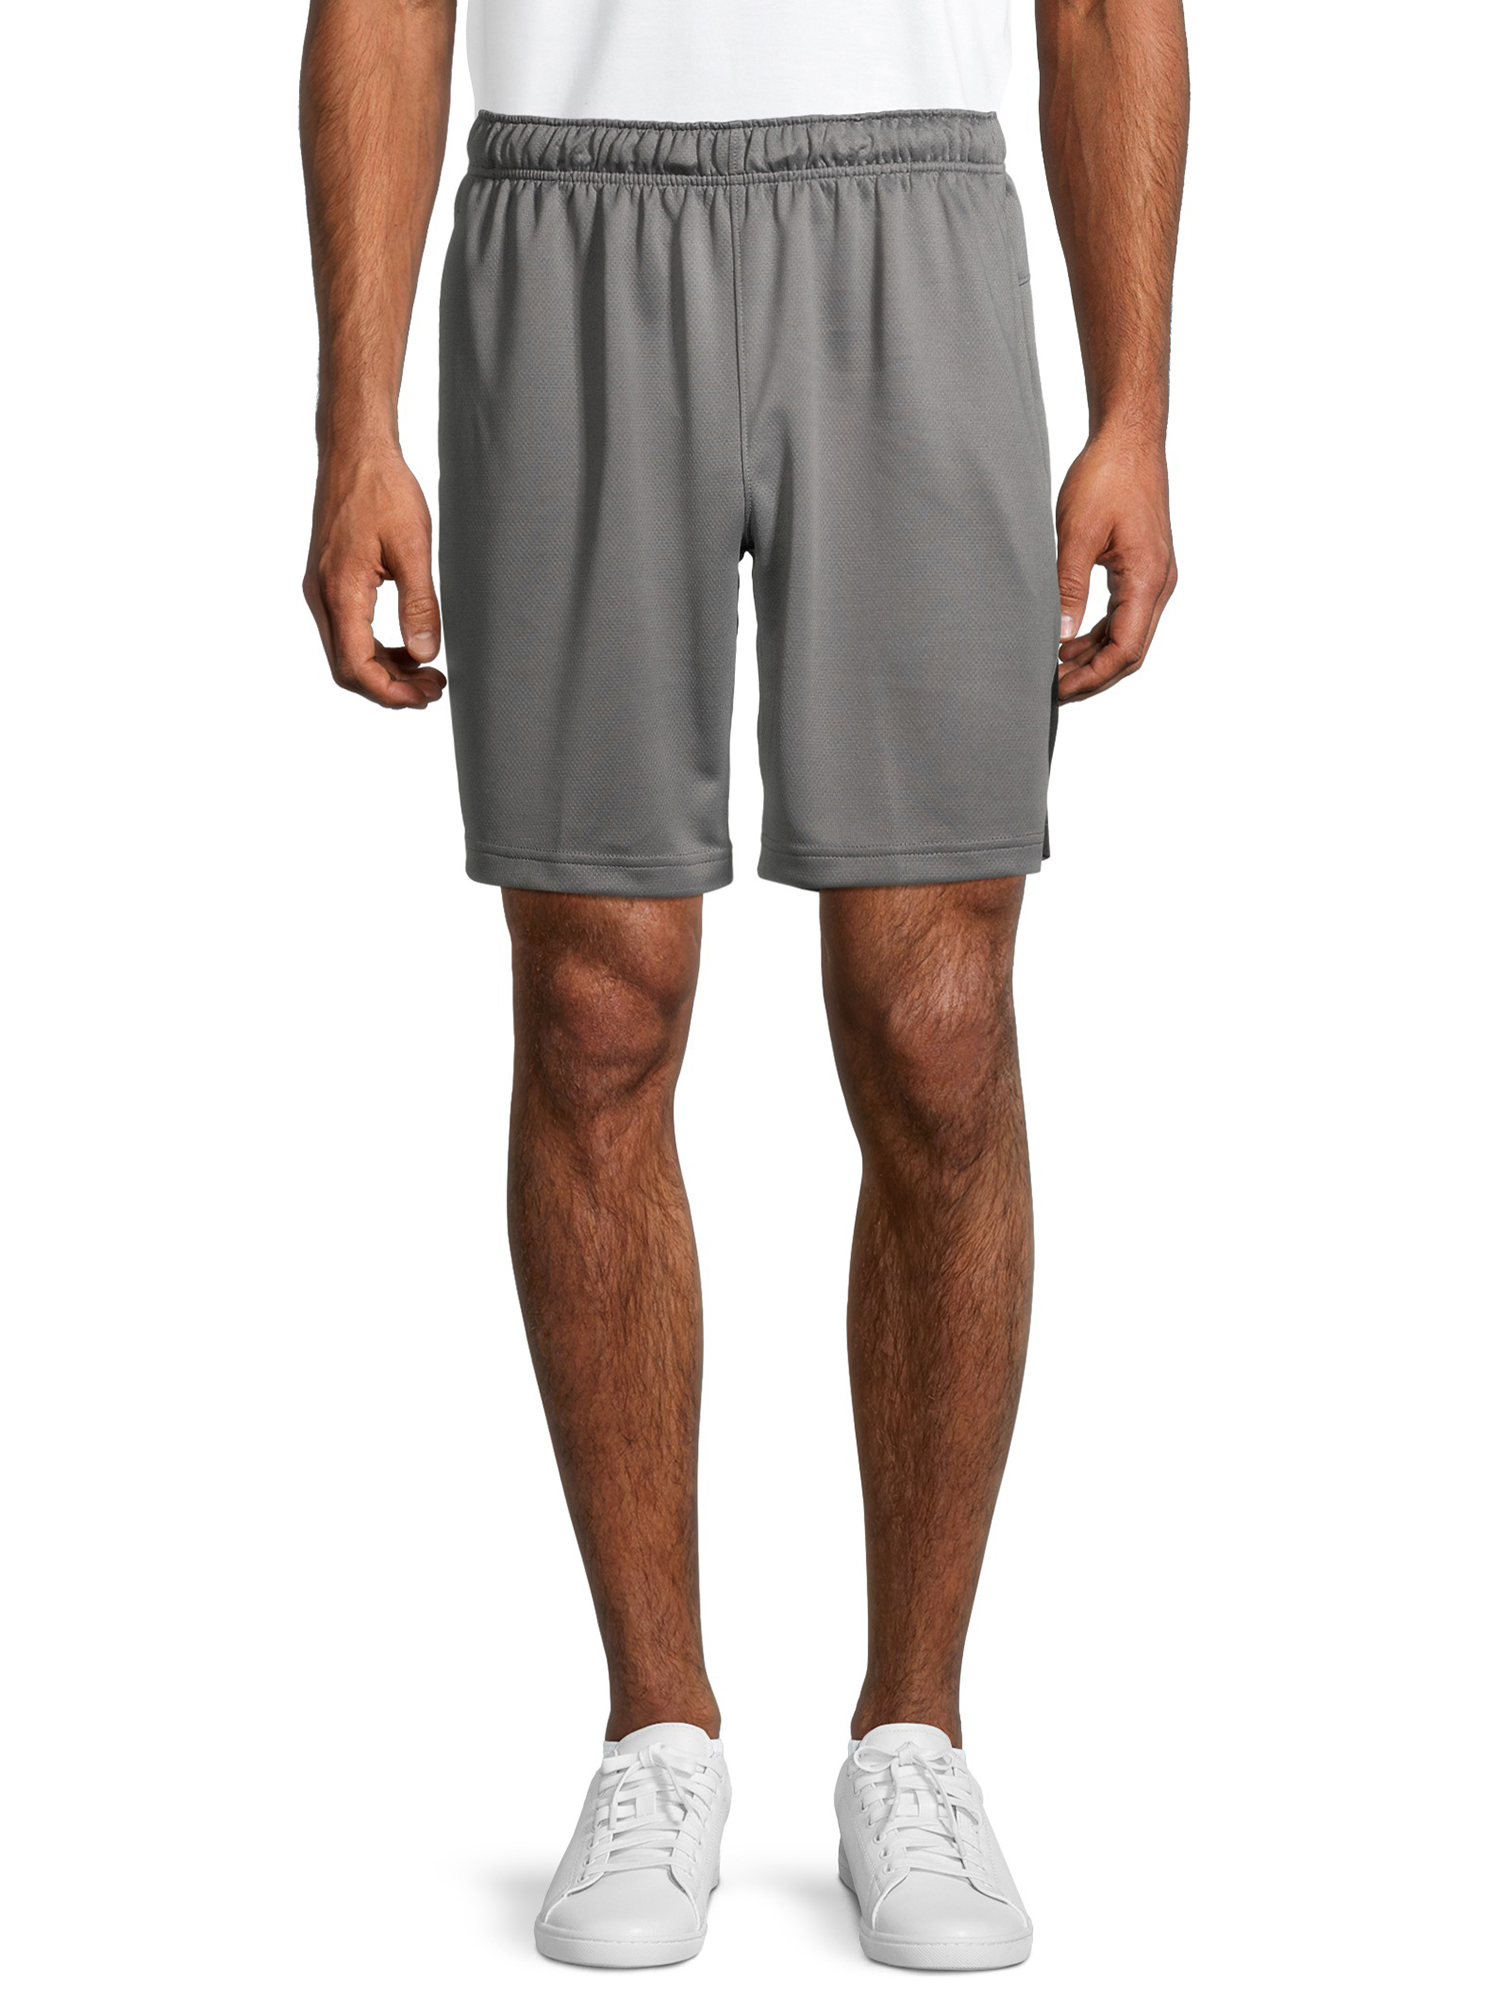 Russell Men's and Big Men's 9" Core Training Active Shorts, up to Size 5xl - image 1 of 6